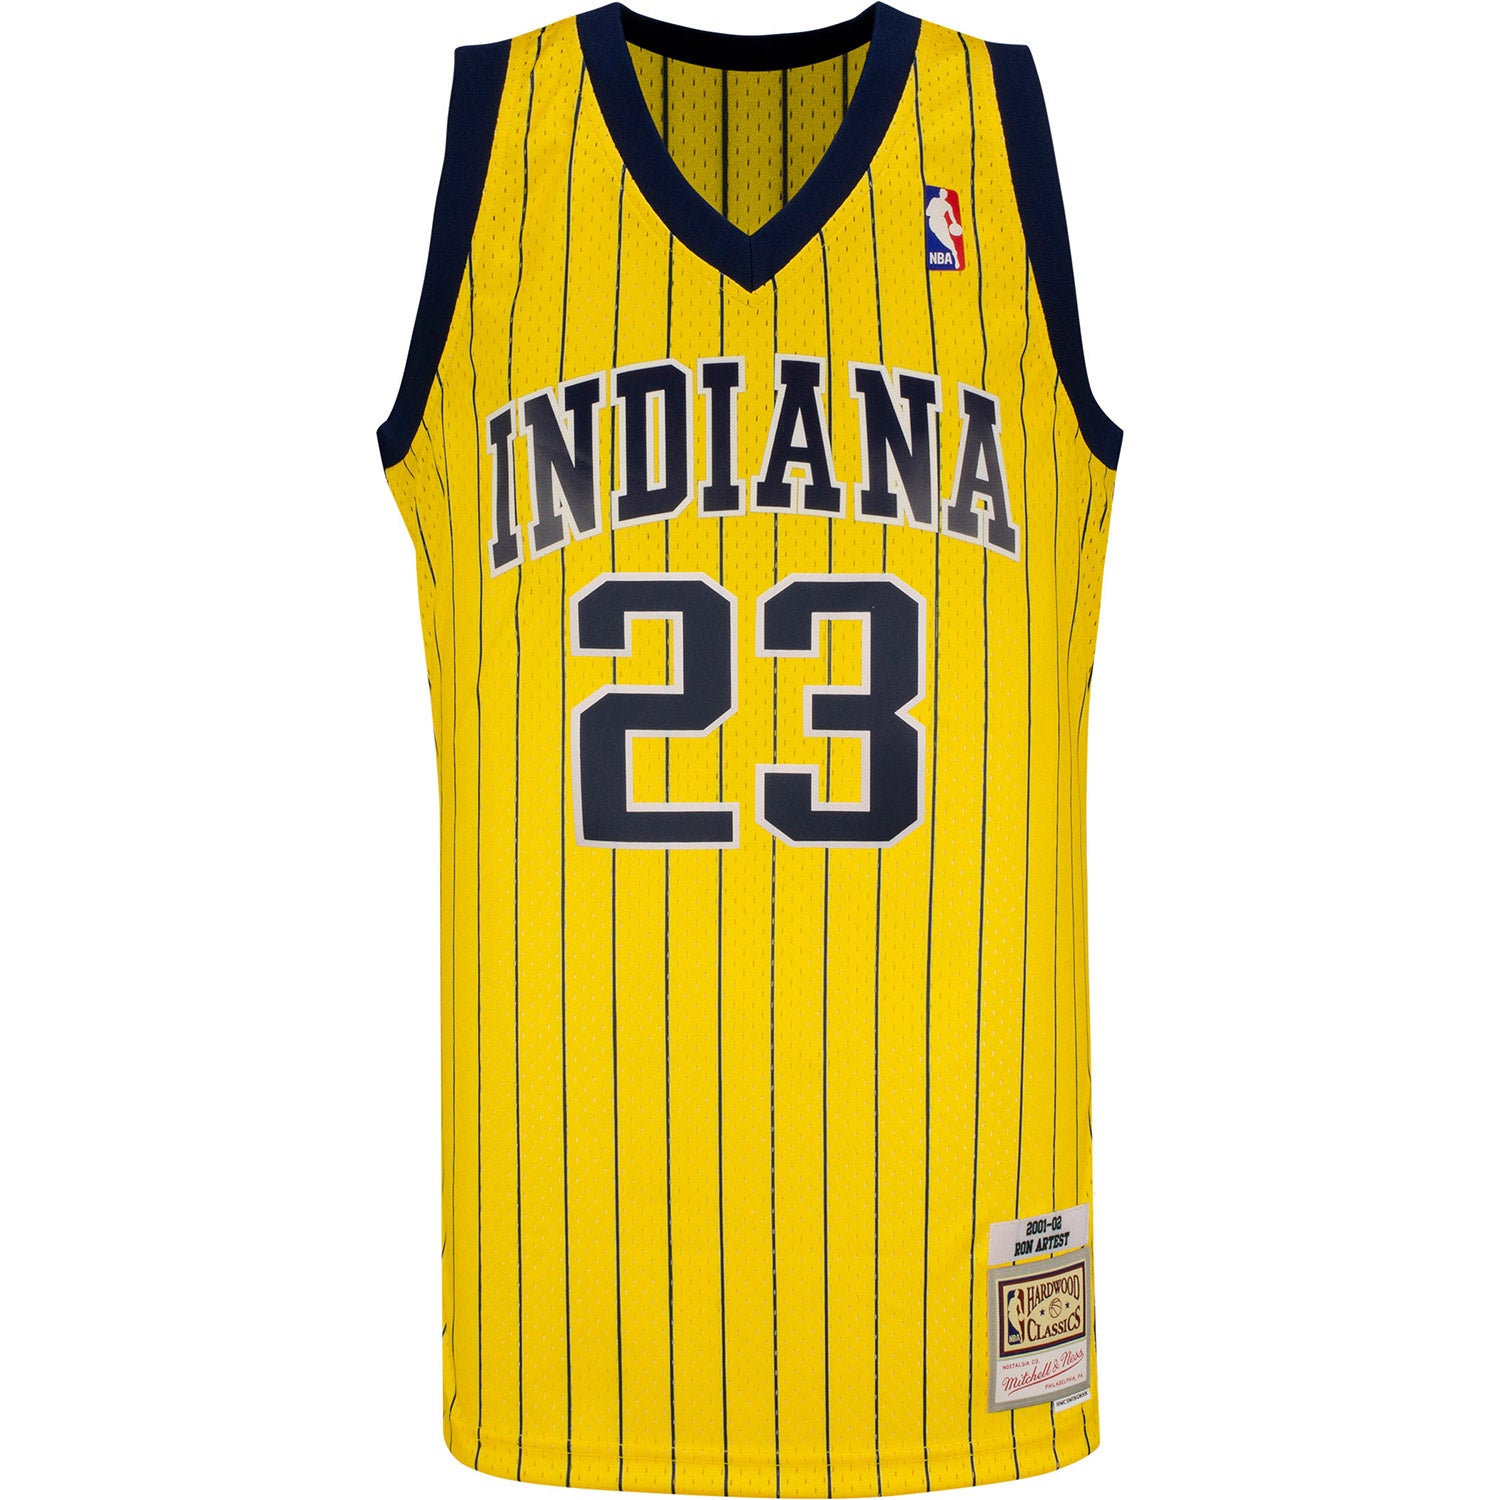 Indiana Pacers jersey